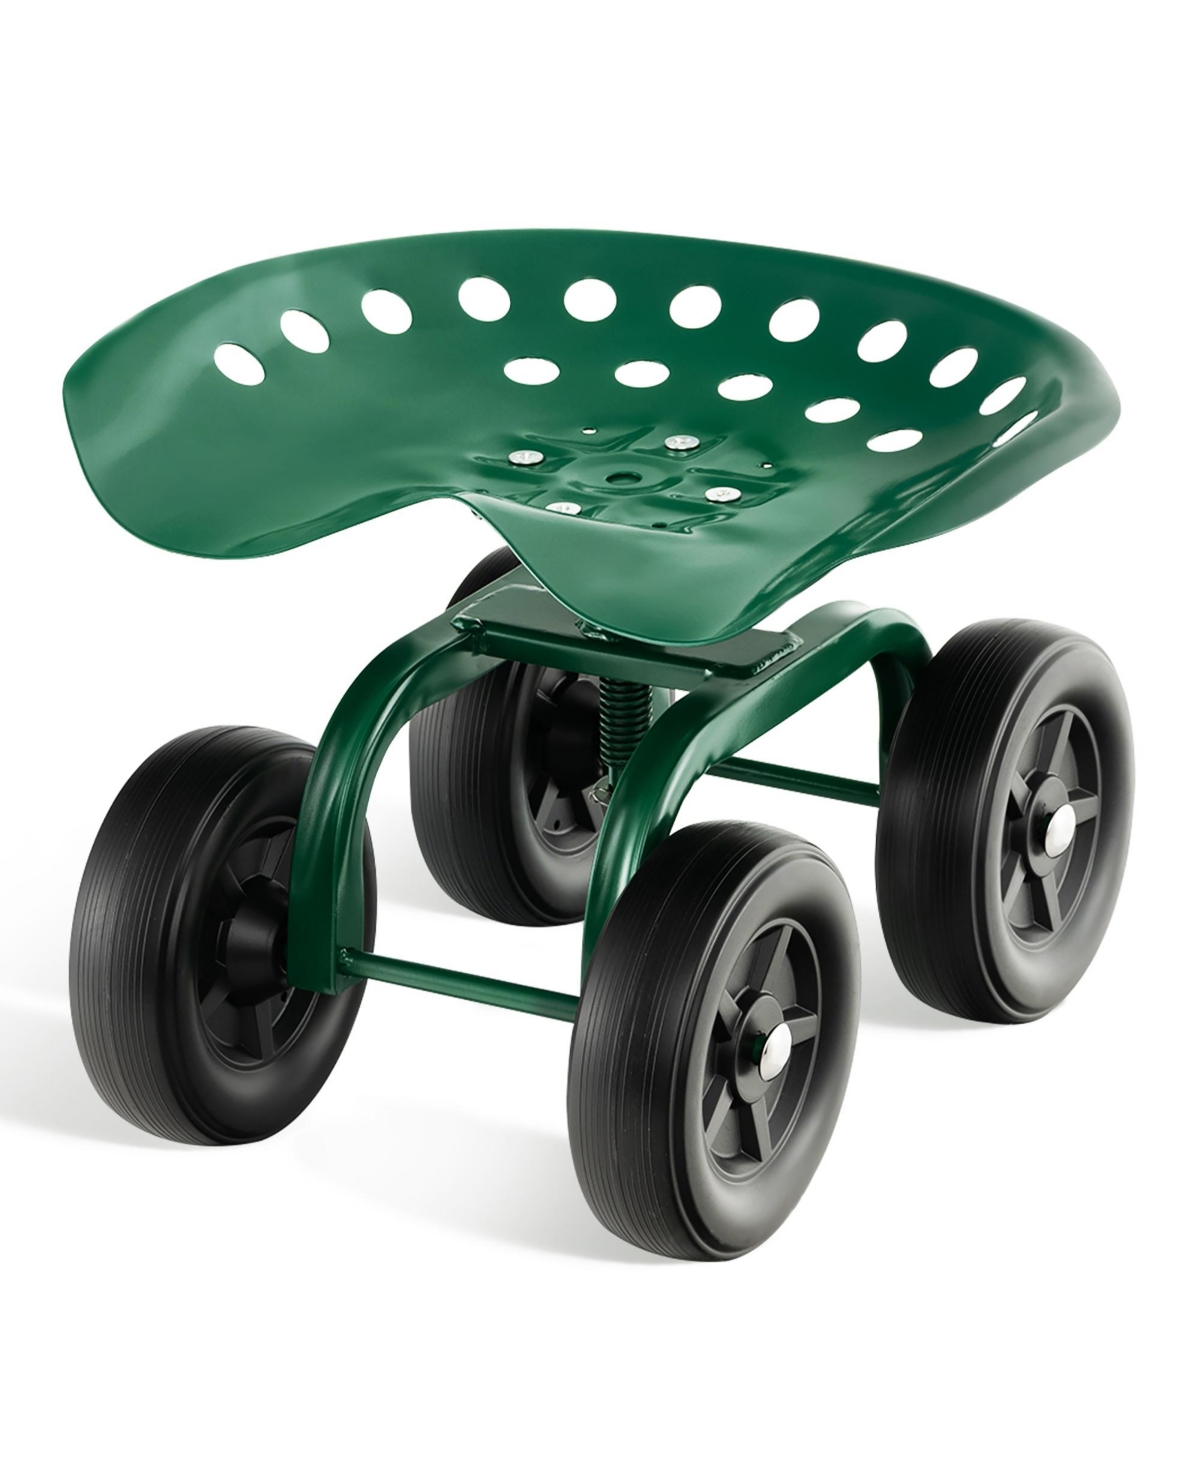 Rolling Garden Cart Heavy Duty Work seat with 360A° Swivel Seat & Adjustable Height - Green